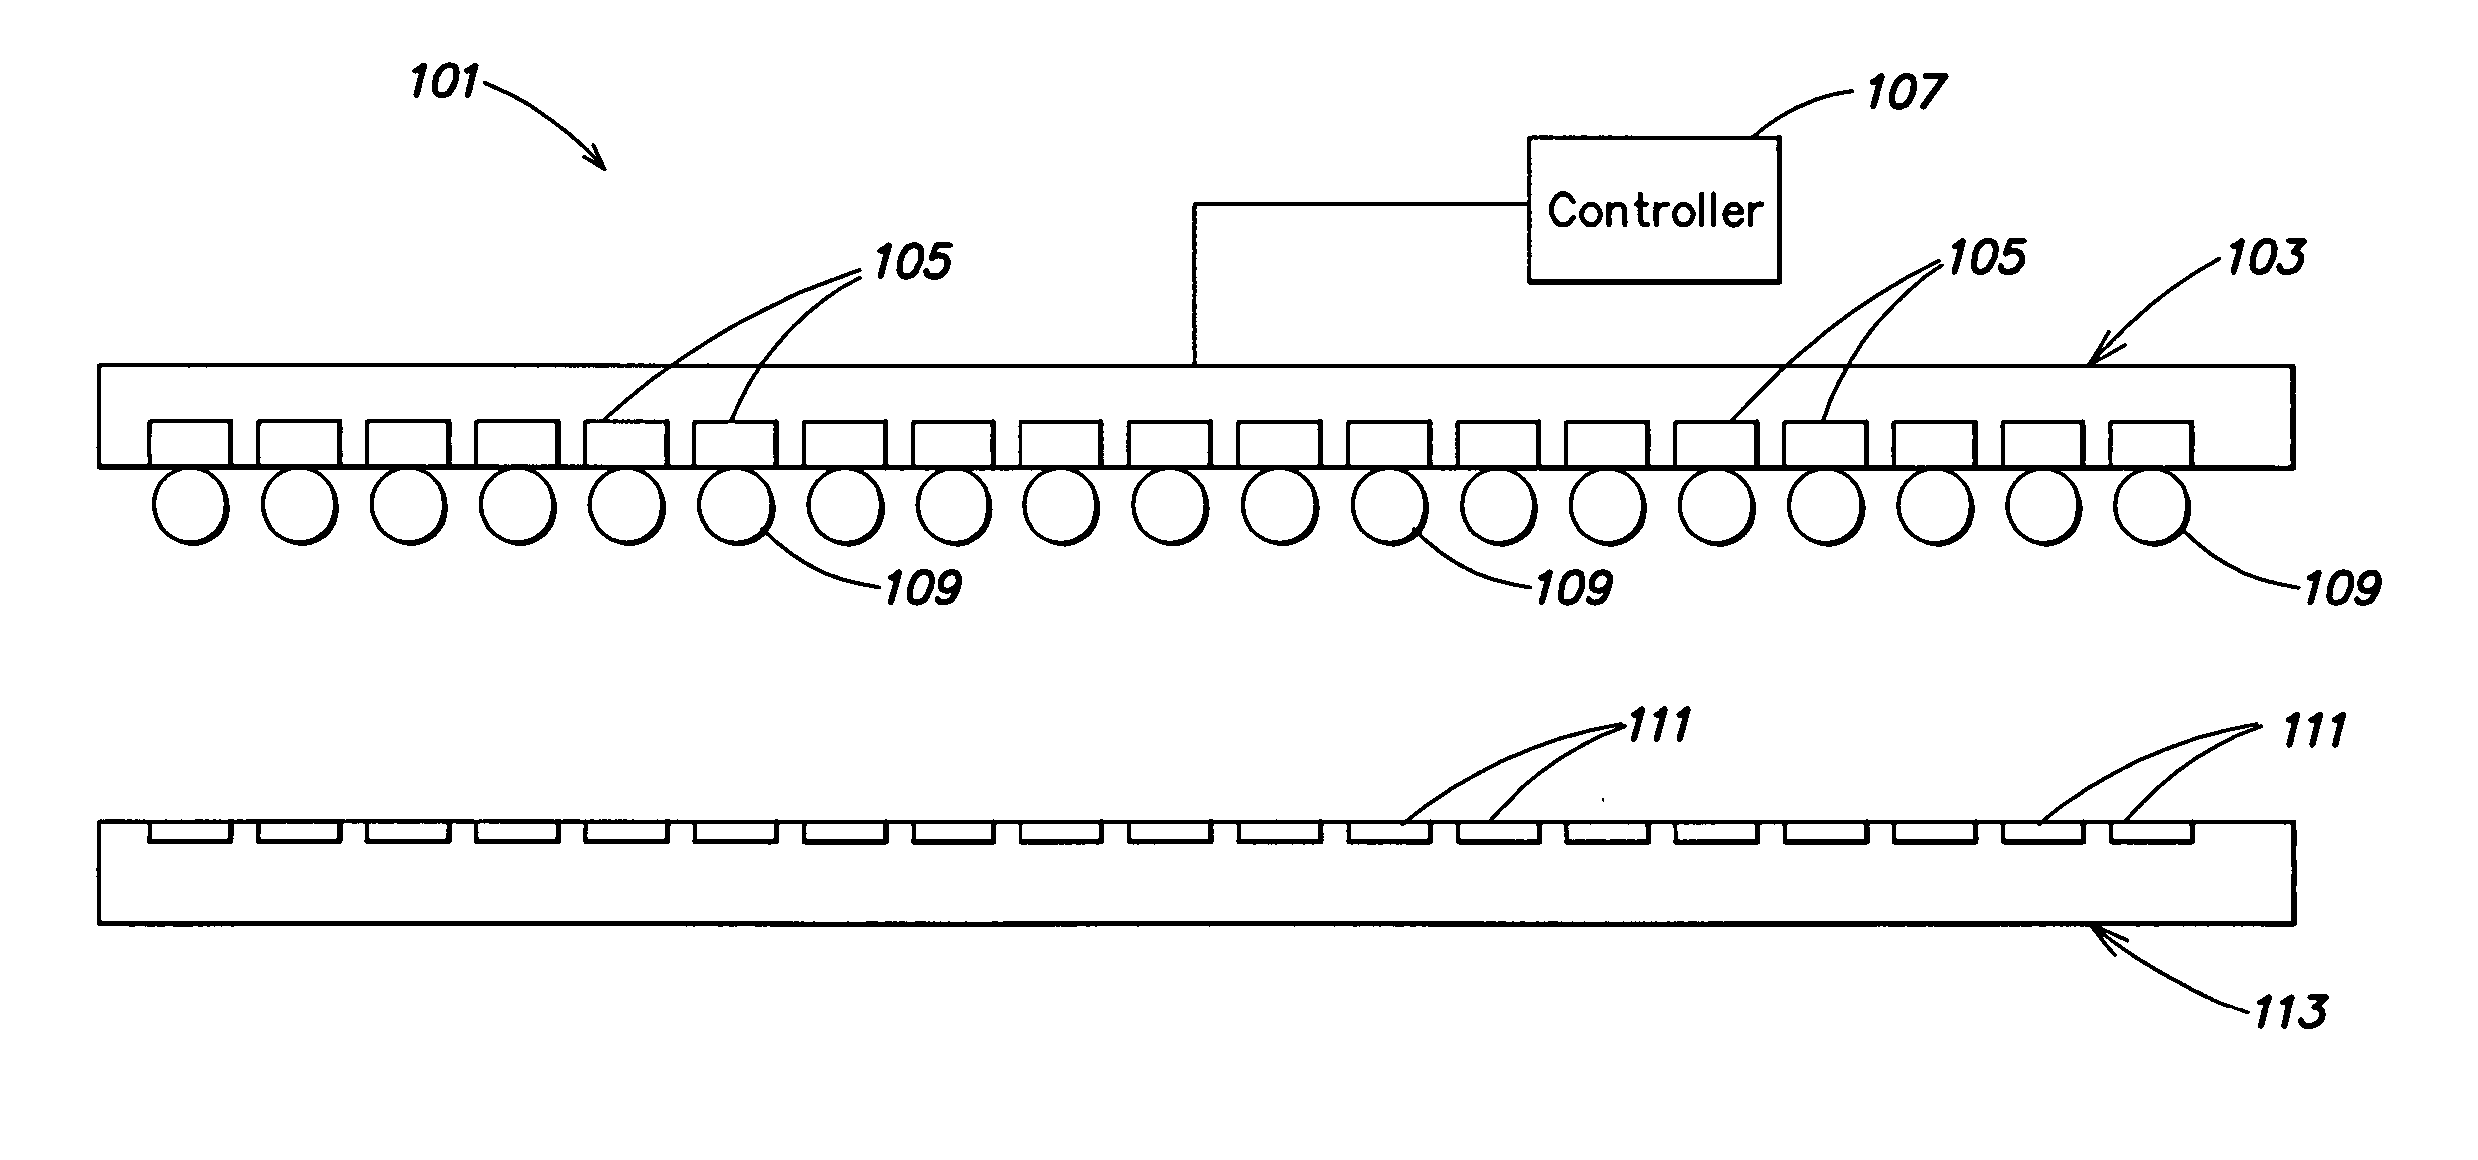 Methods and apparatus for transferring conductive pieces during semiconductor device fabrication